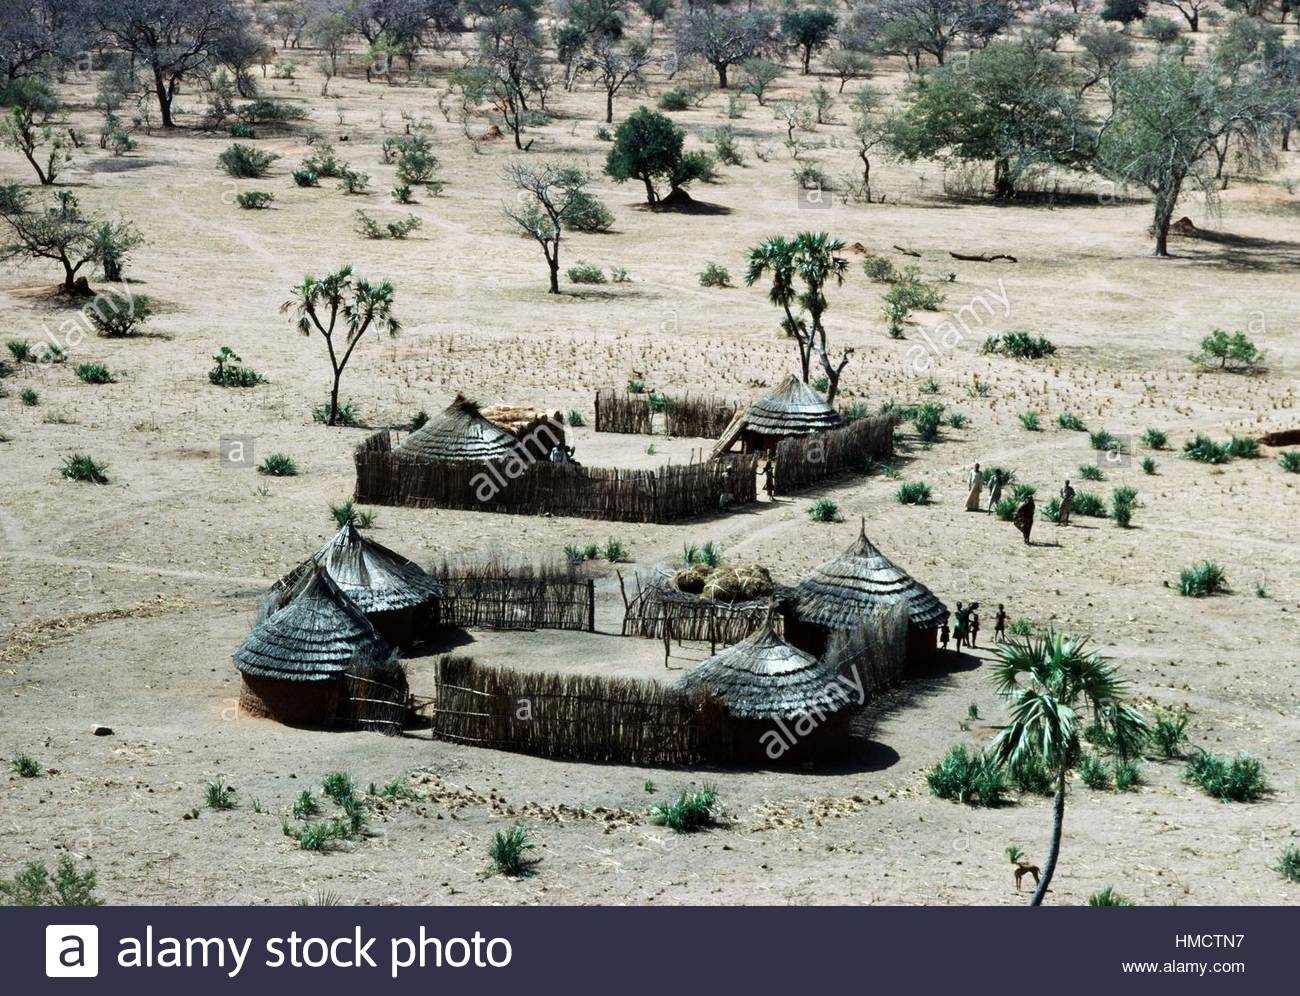 view-of-the-huts-in-a-nuba-village-kordo